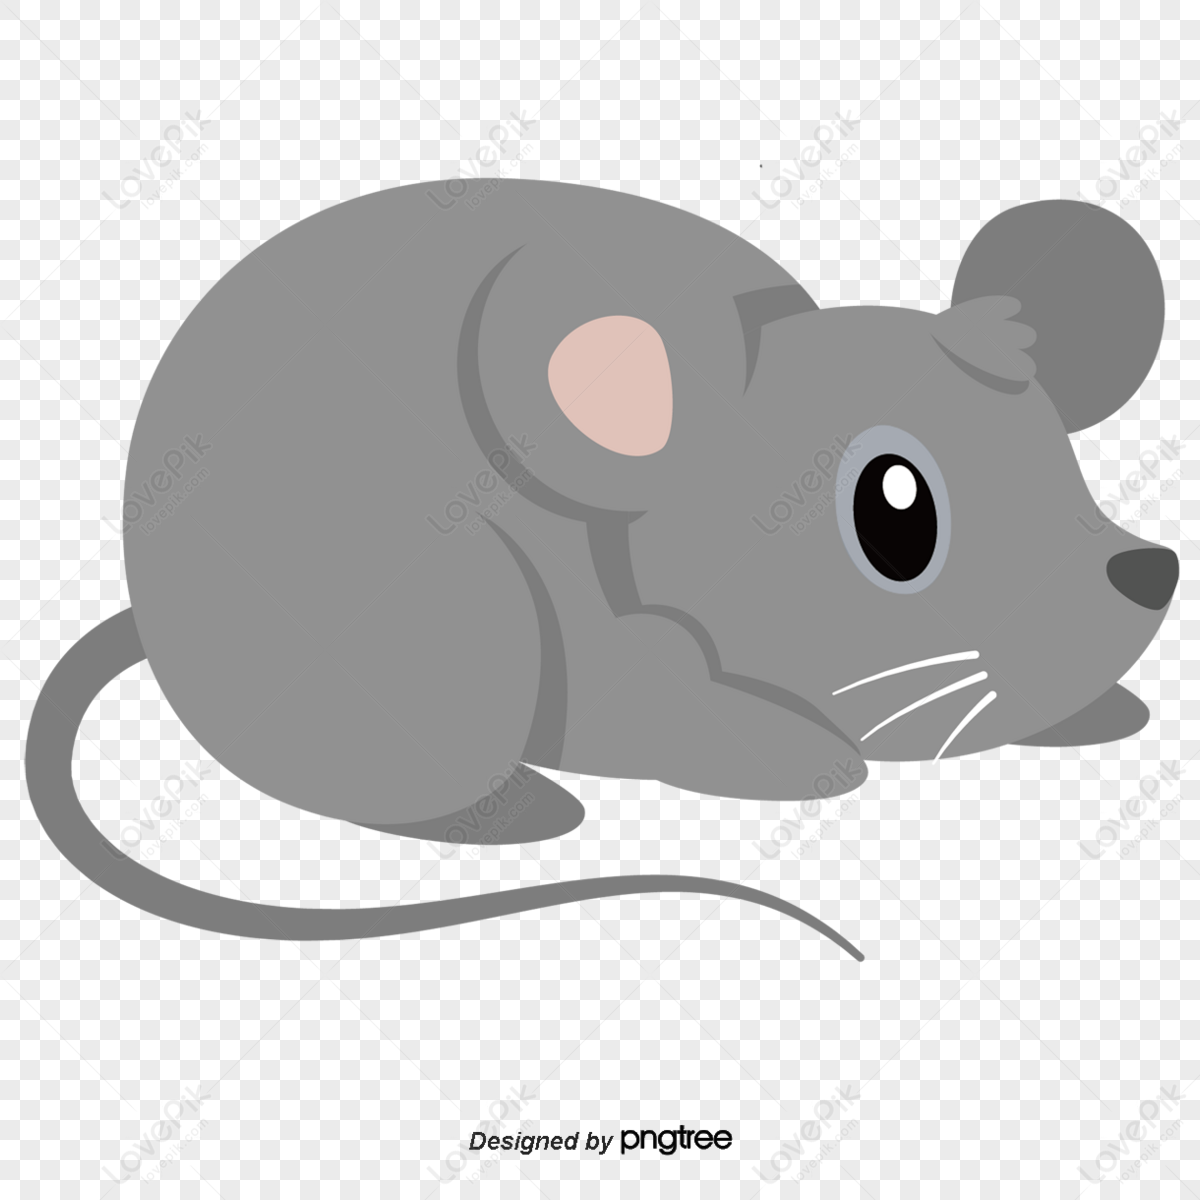 blue mouse vector,elephant,illustration,happy png free download